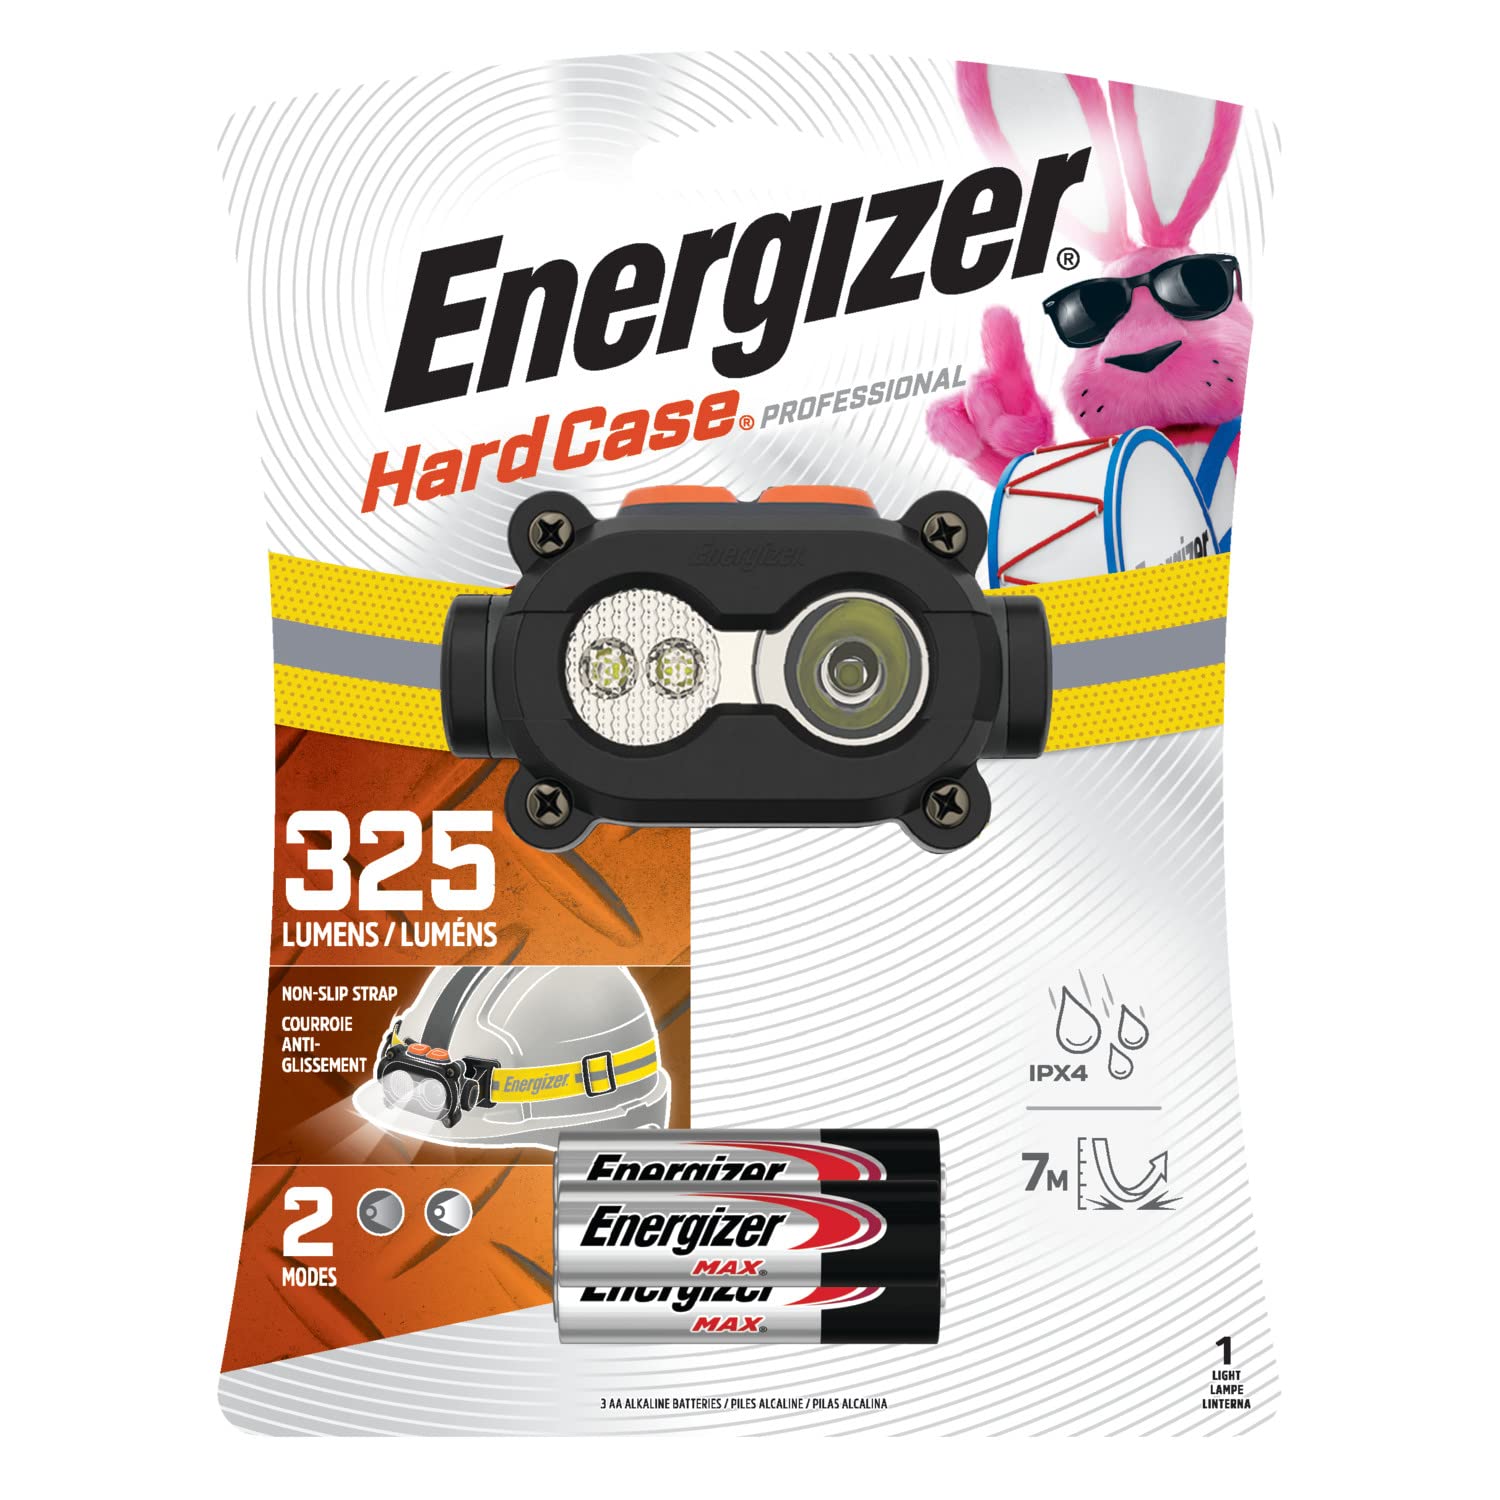 Energizer Hardcase LED Headlamp, Water Resistant Hard Hat Headlamp for Construction Work, Camping and Emergency Light, Includes Batteries, Pack of 1